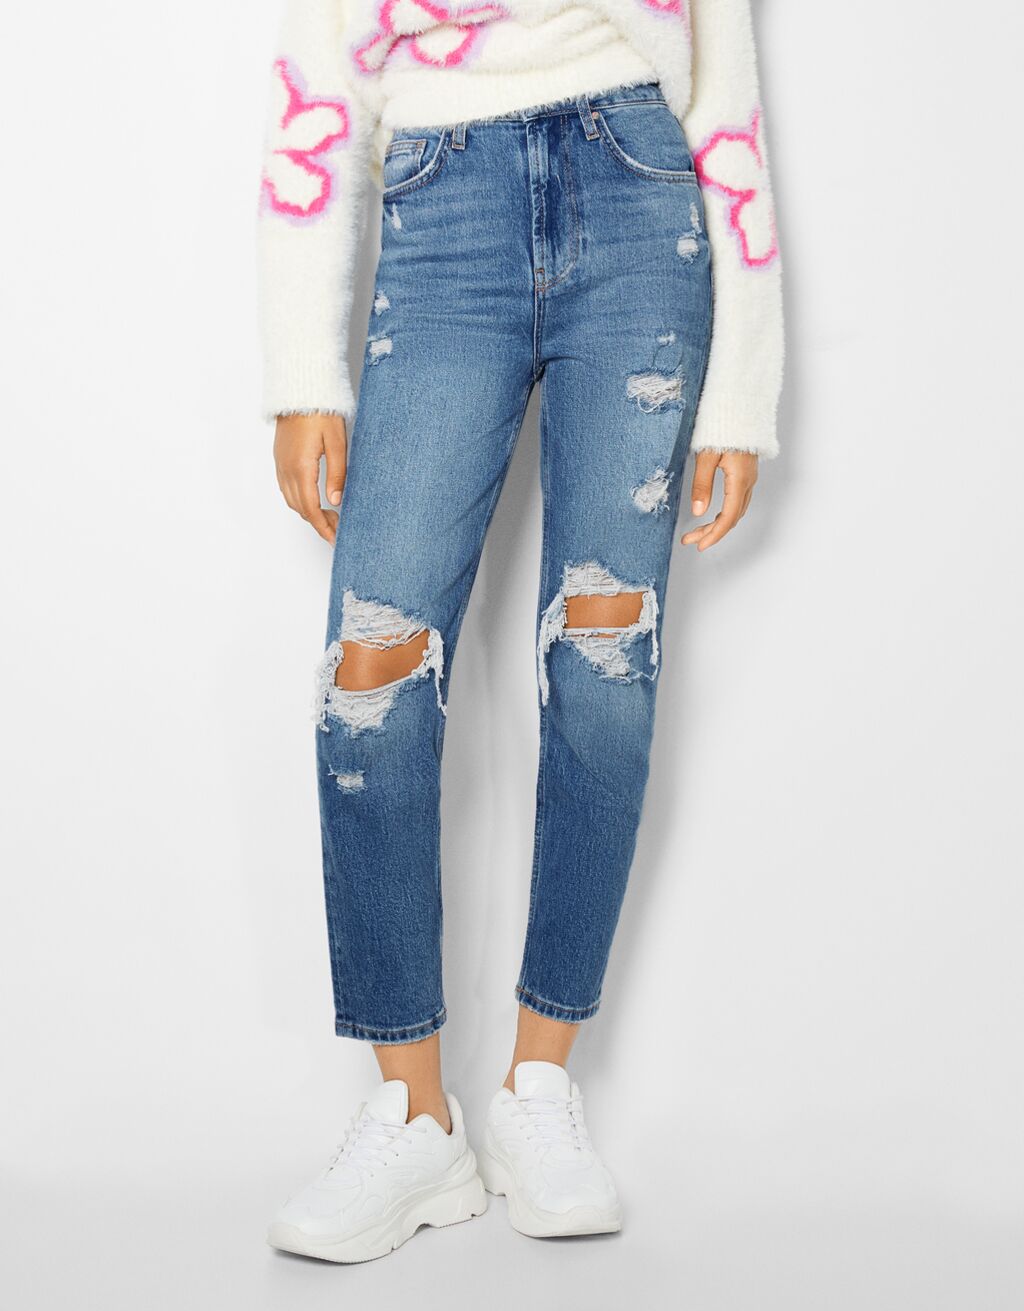 Ripped comfort jeans